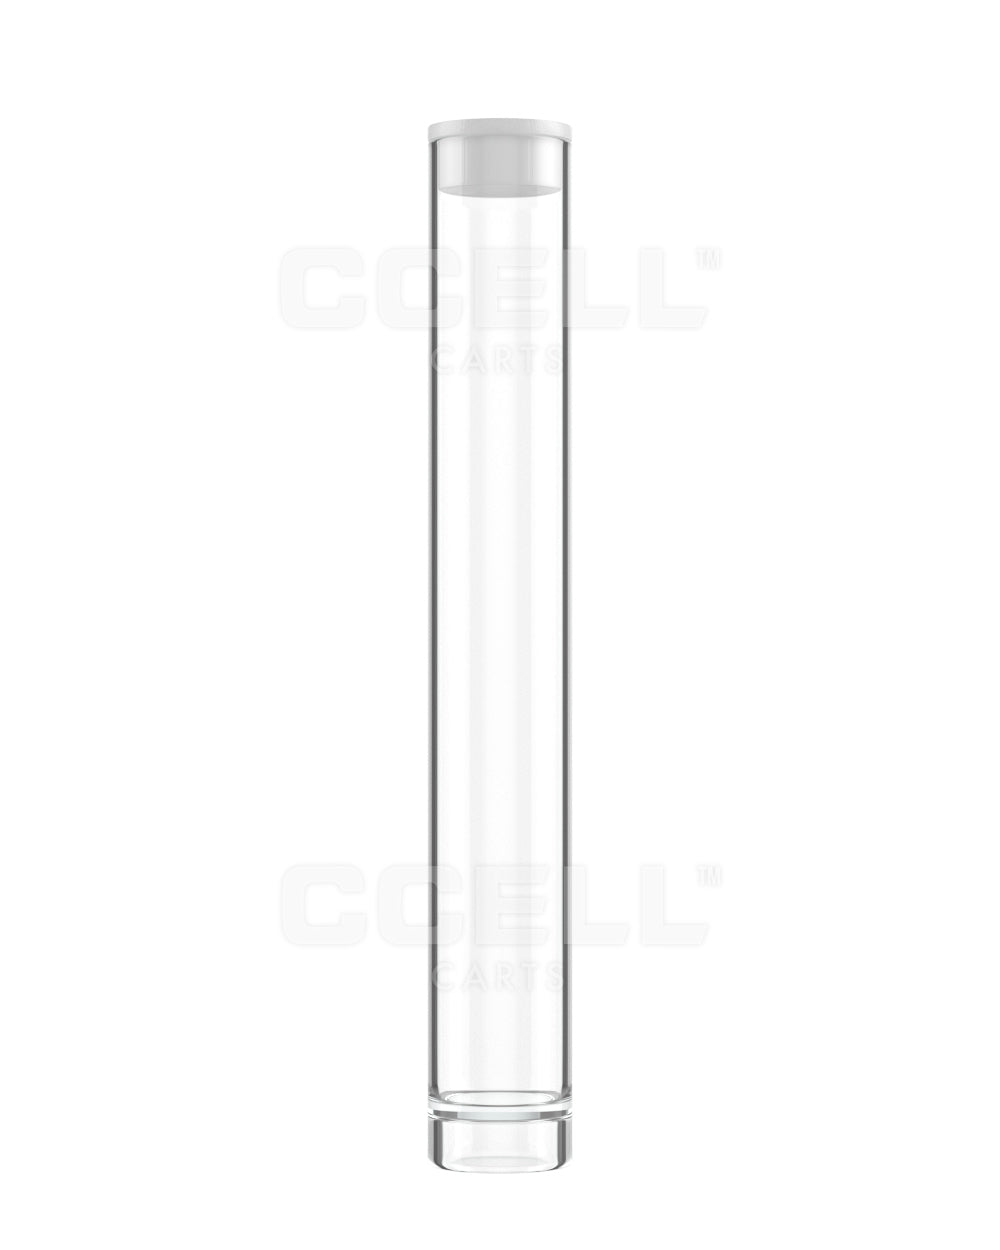 White Cap Buttonless Vaporizer Cartridge Storage Tube - One Size - 500 Count